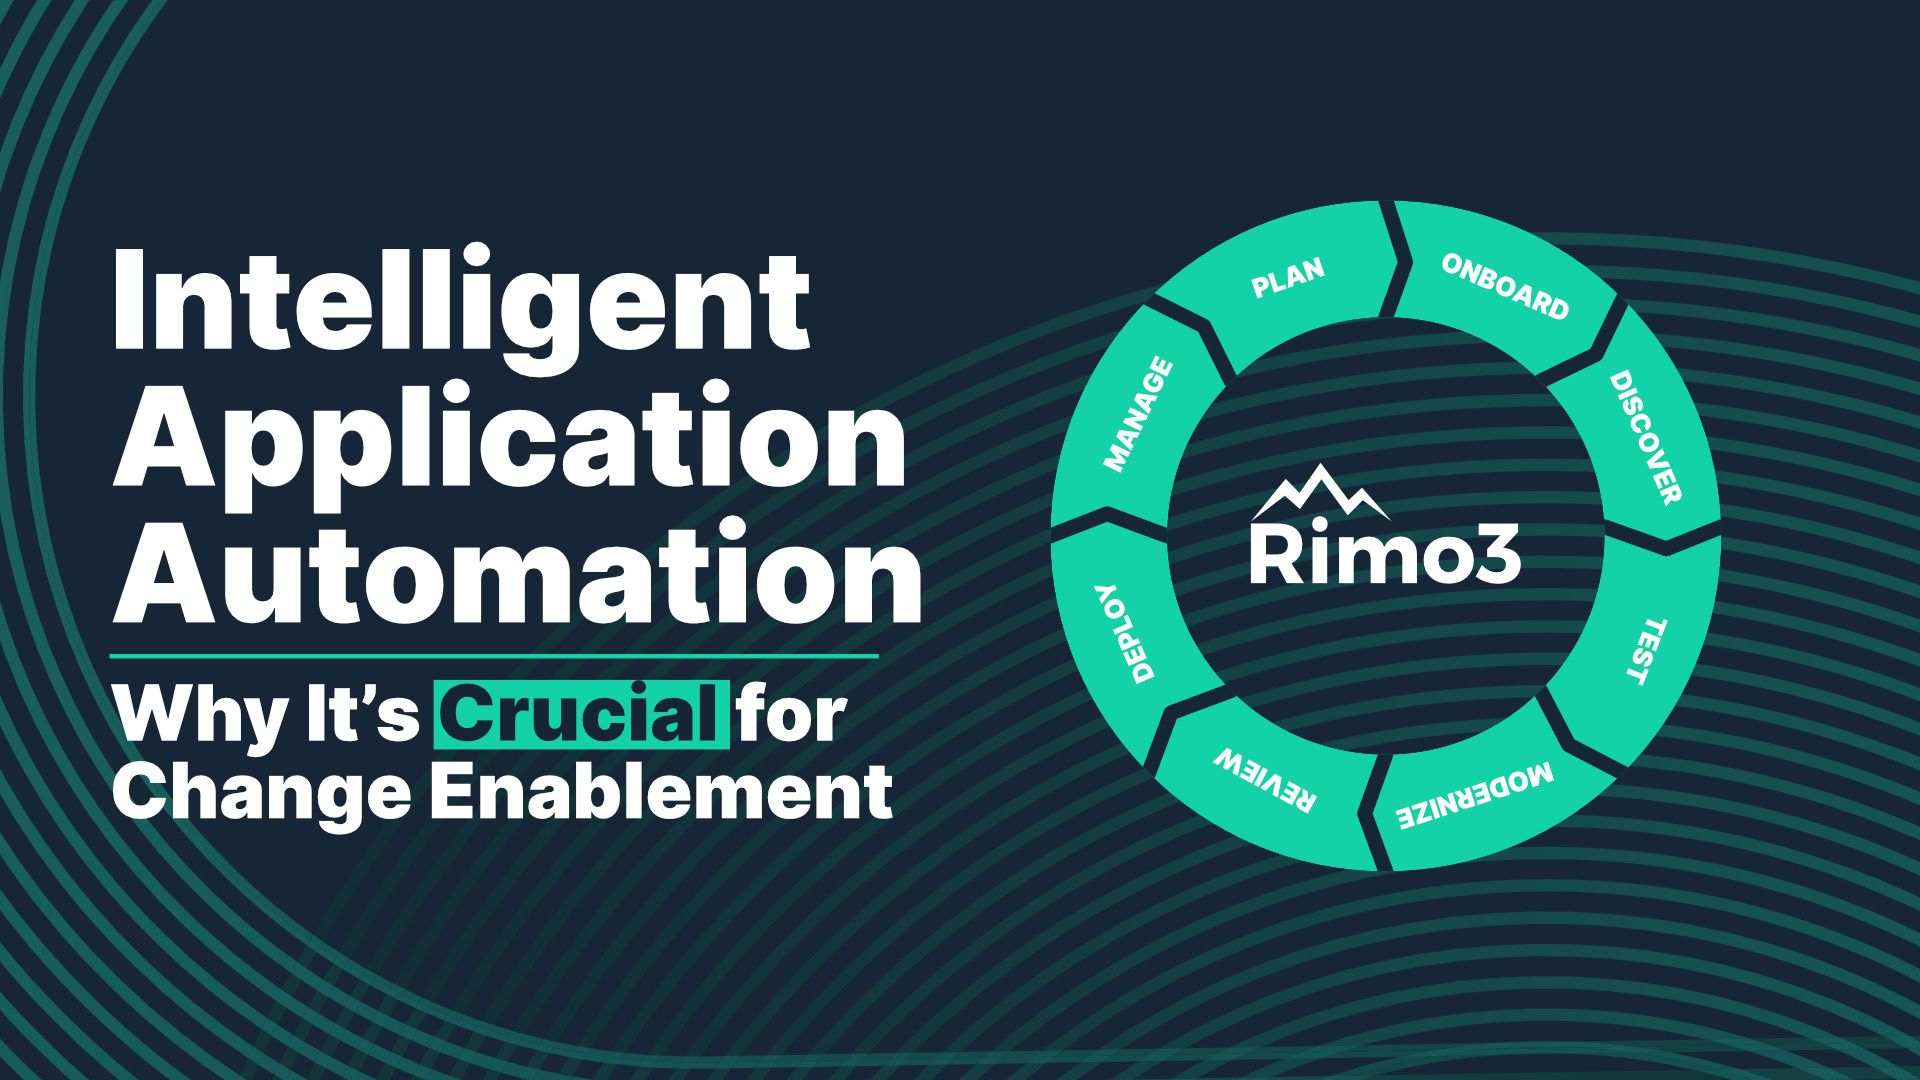 Intelligent Application Automation: Why It’s Crucial for Change Enablement